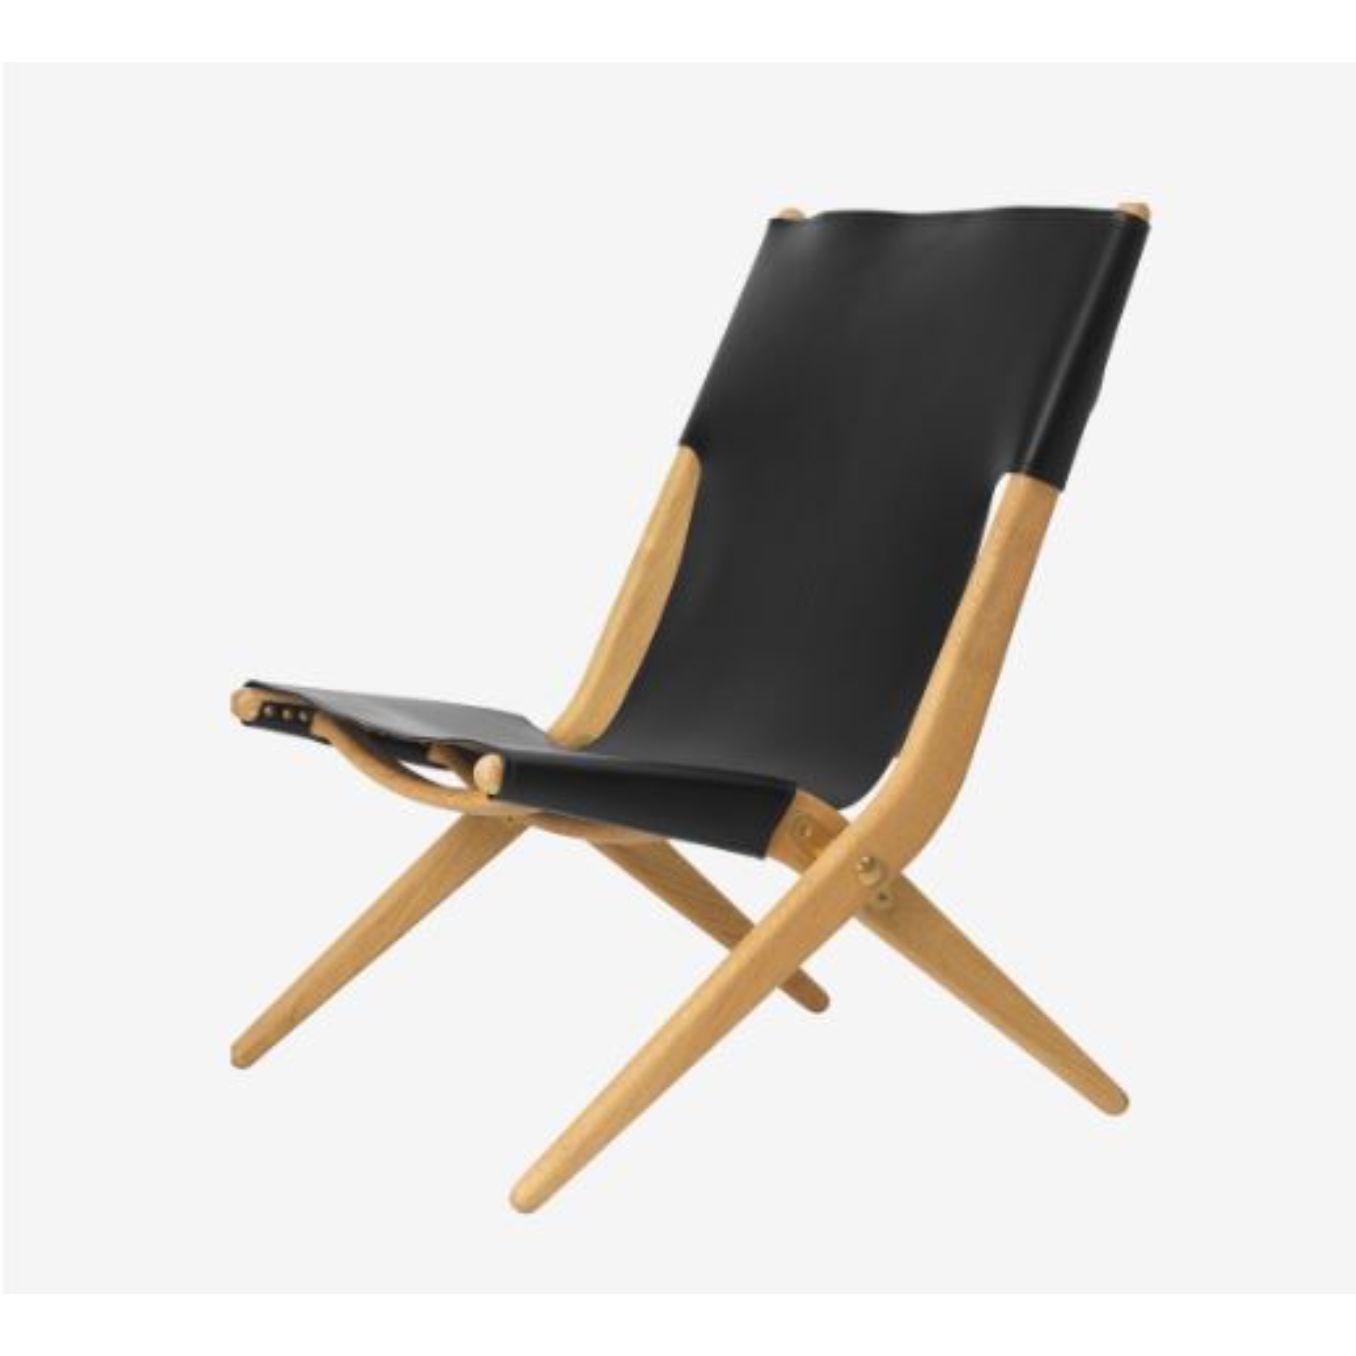 Oiled oak black leather saxe chair by Lassen.
Dimensions: D 67 x W 60 x H 84 cm. 
Materials: Leather, Wood, Oiled Oak.
Also available in different colors and materials.
Weight: 13 Kg

Mogens Lassen was perceived as ‘the naughty boy in class’,